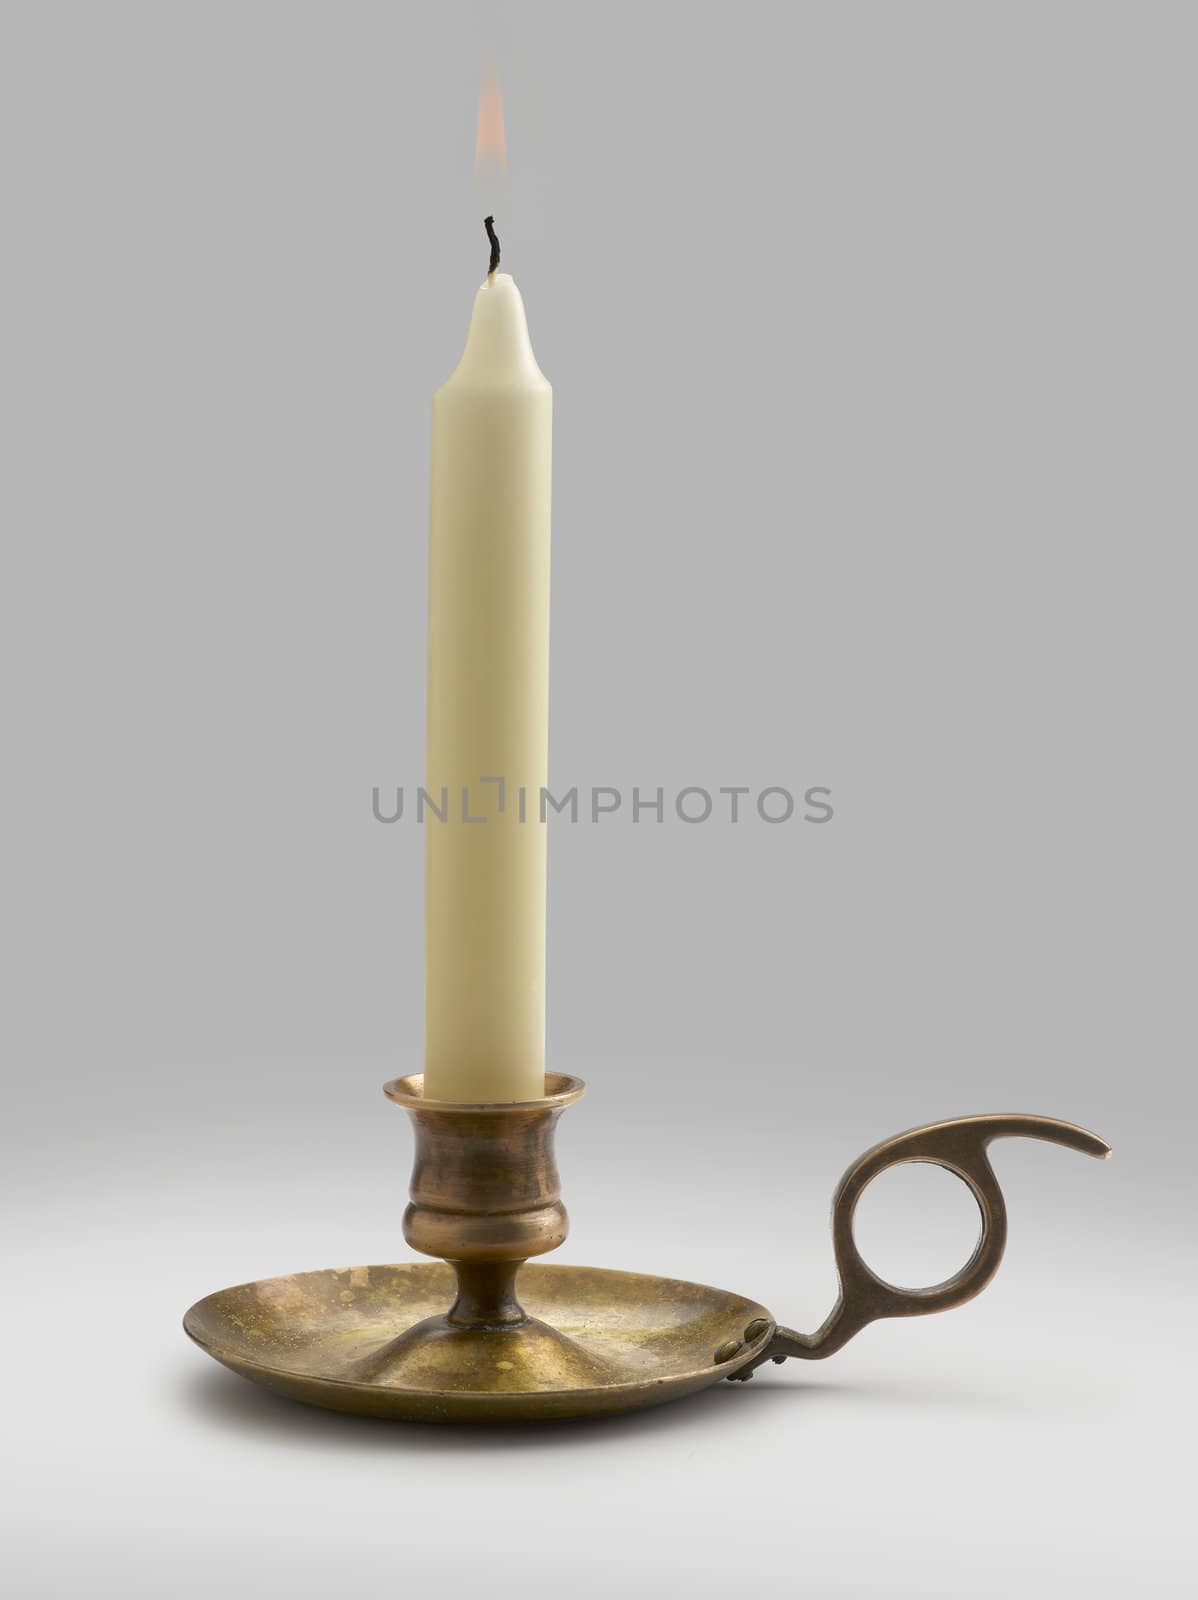 Candlestick with flame lights (clipping path)